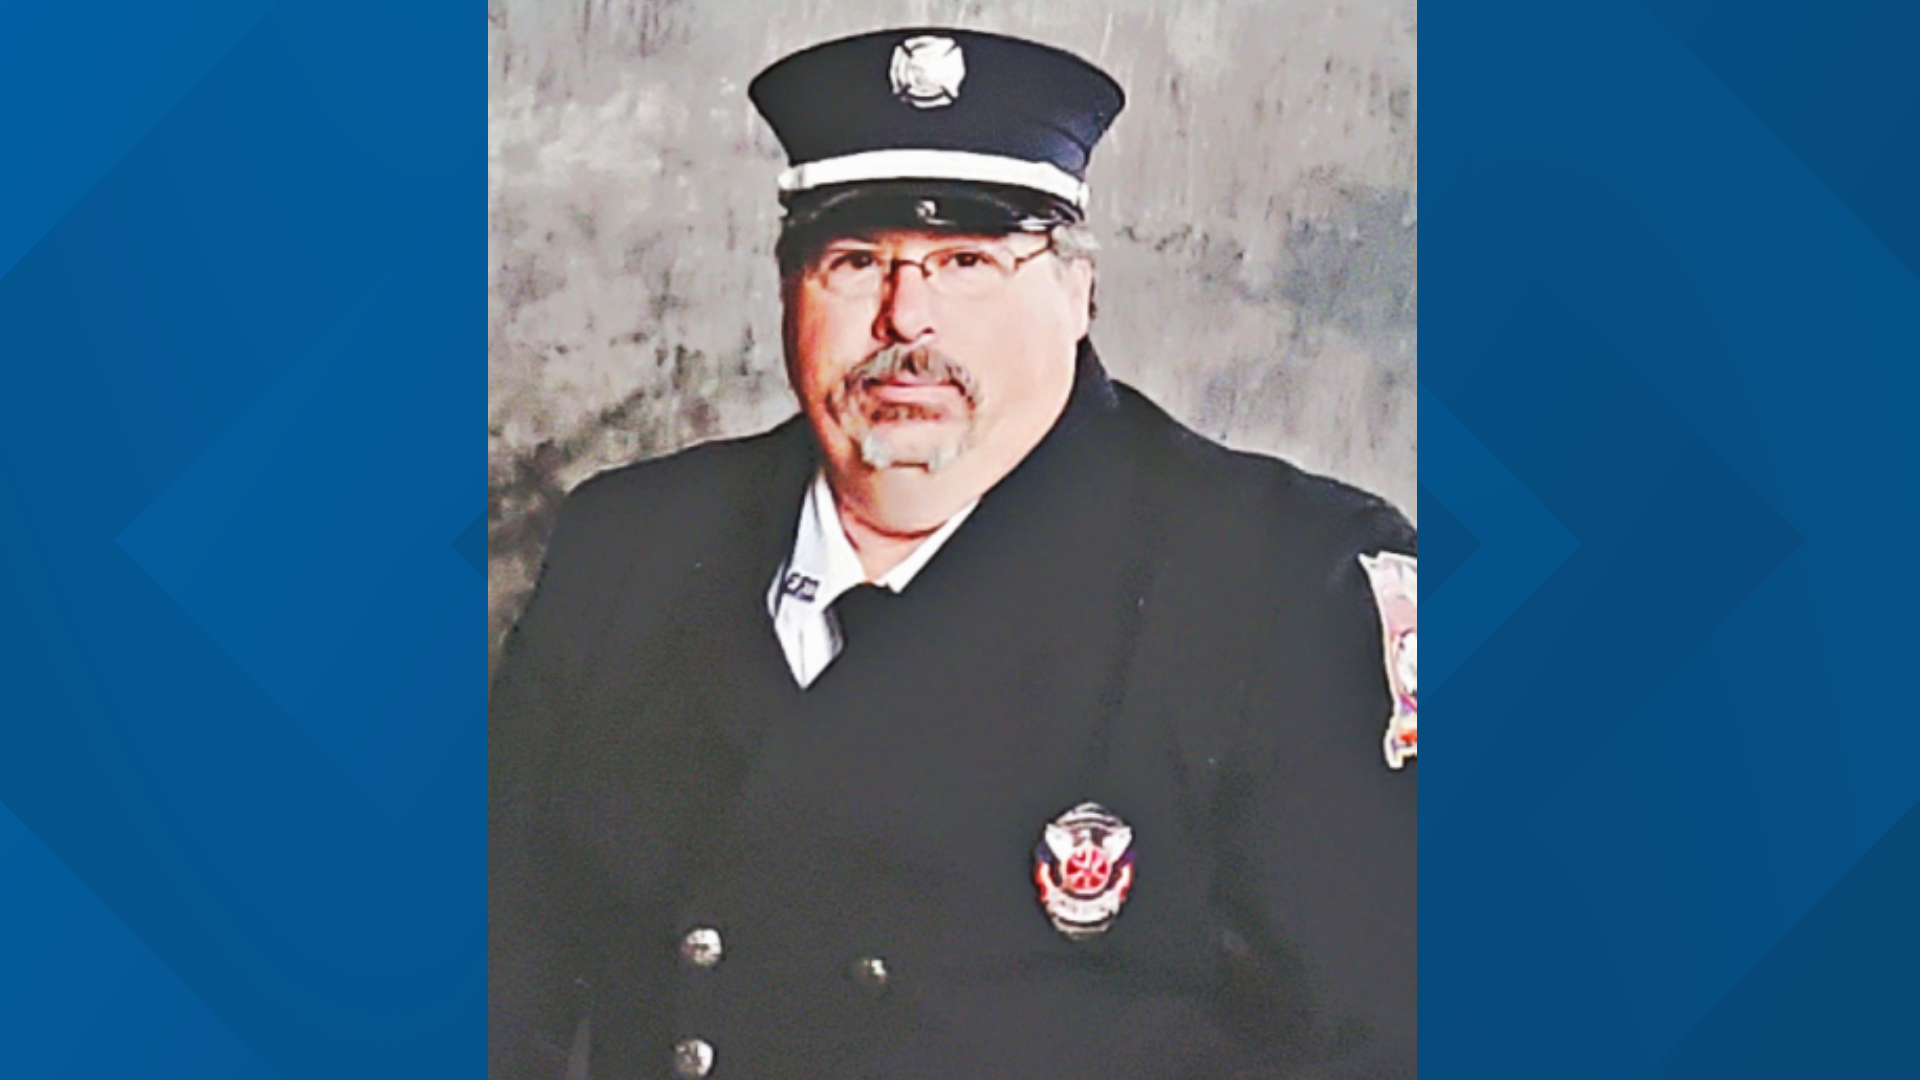 Mark Gillam was a 31-year veteran of the Elwood Fire Department. Prior to becoming a firefighter, he served in the United States Marine Corps.